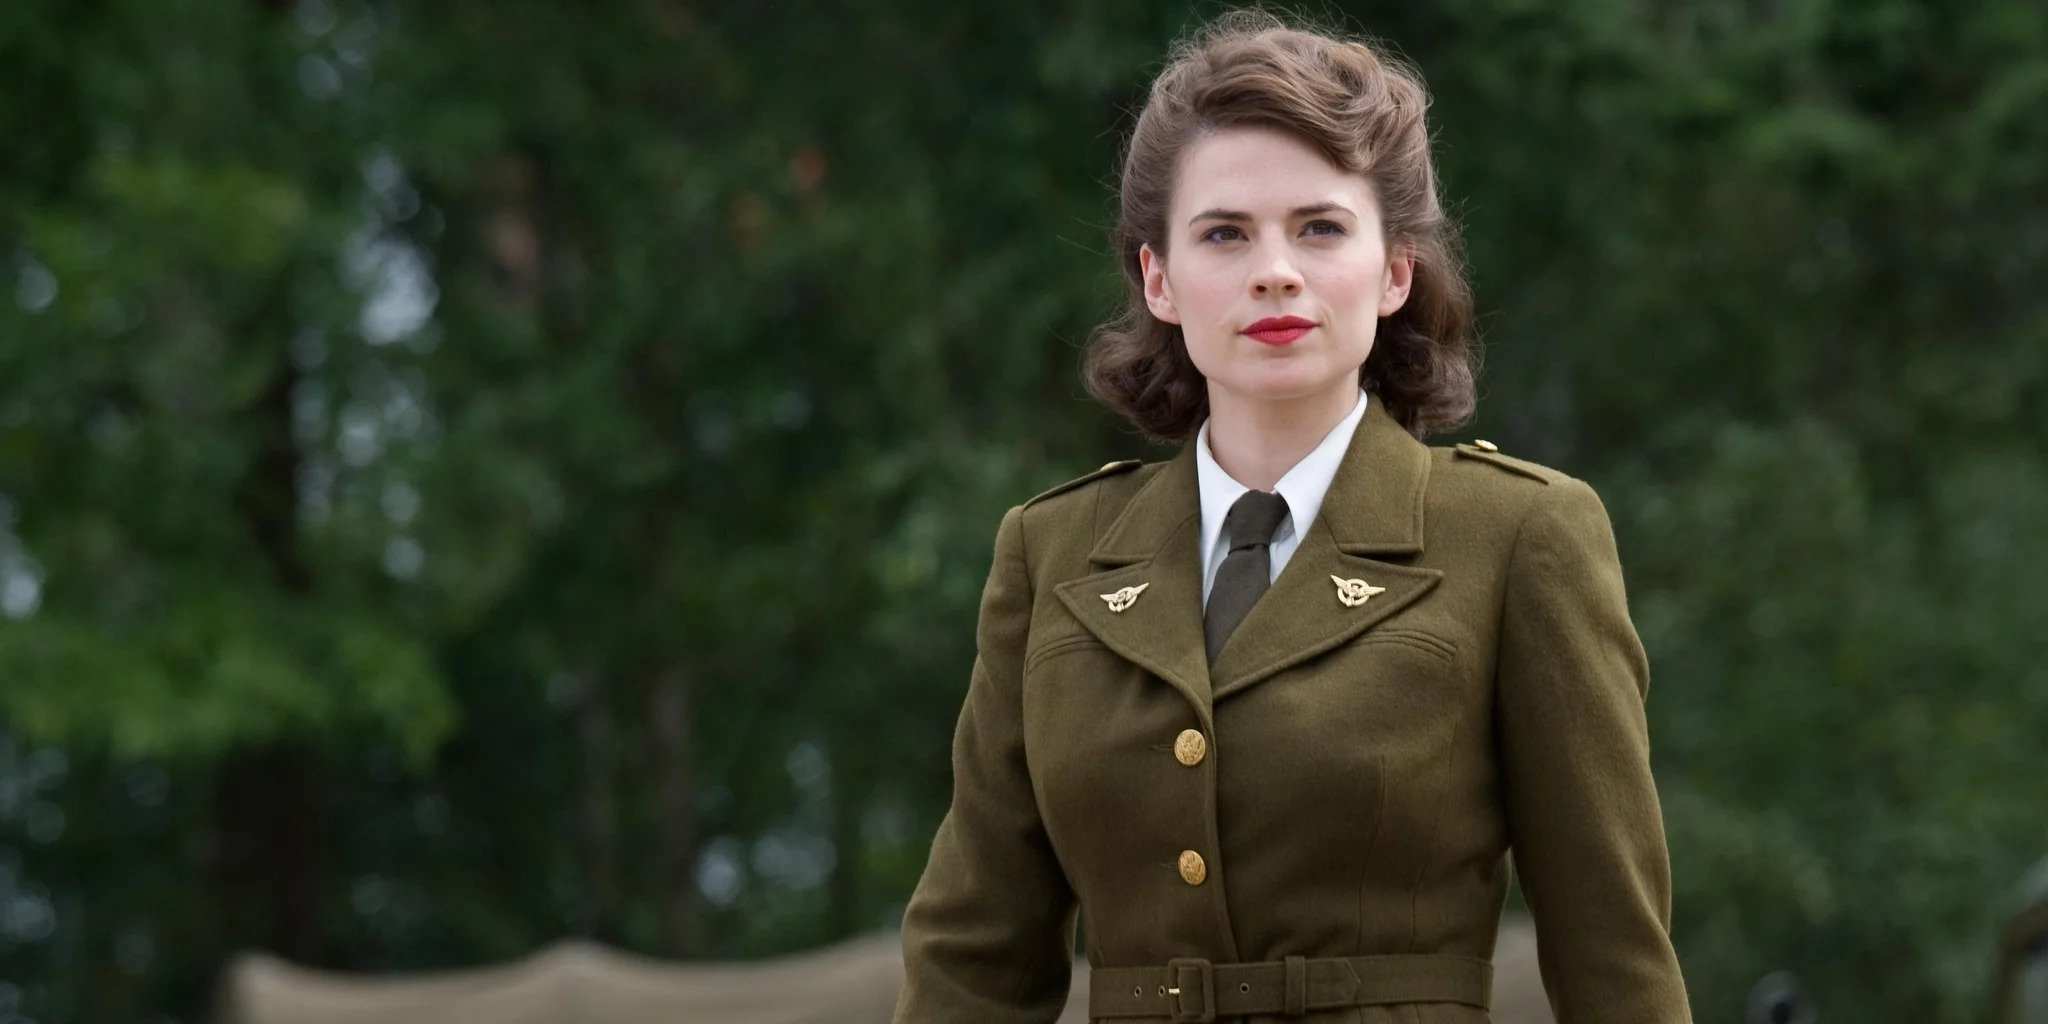 What is Peggy Carter's actual first name?